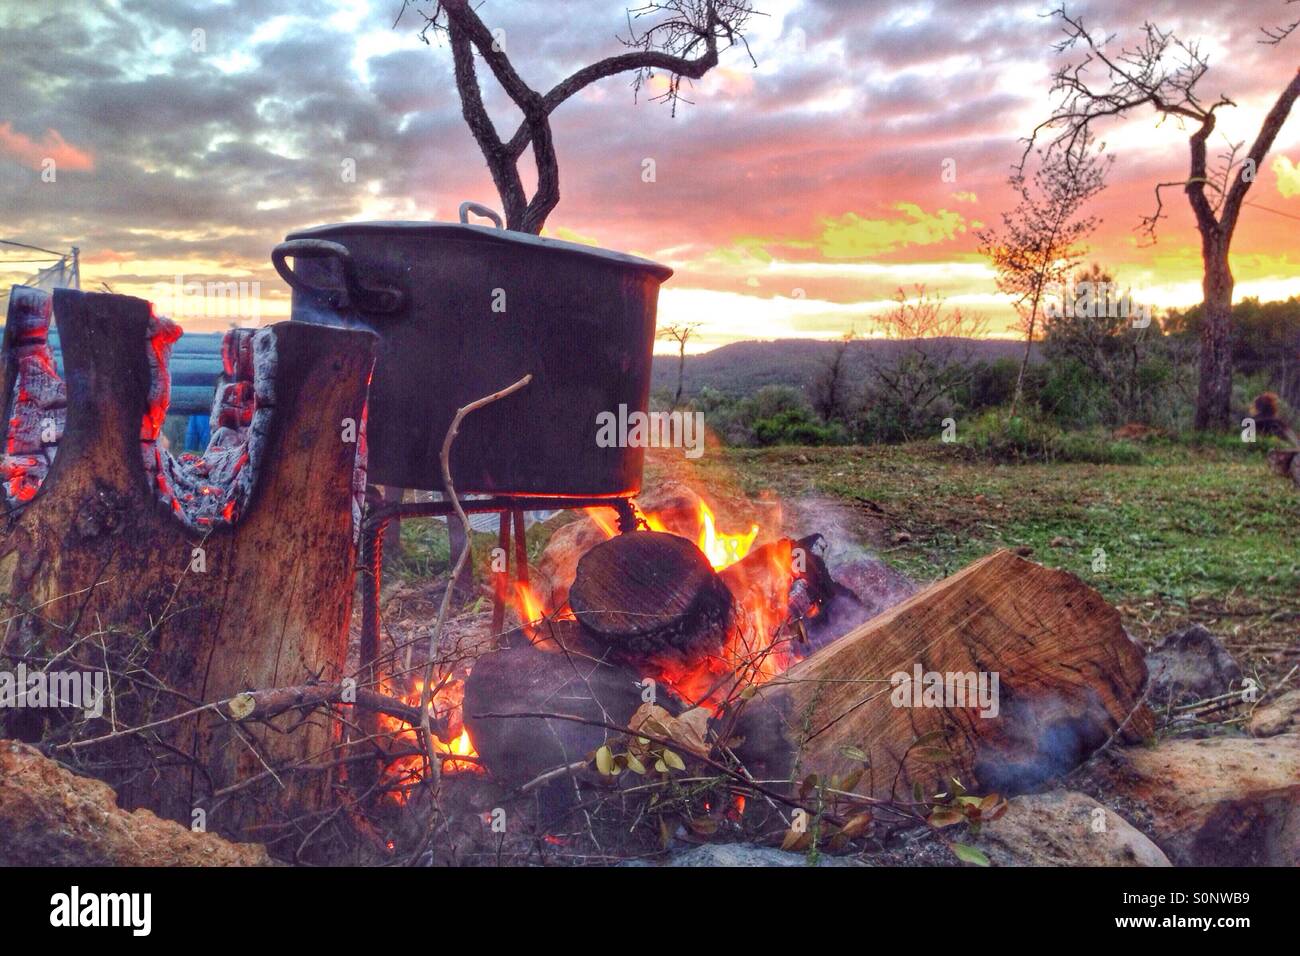 Camp fire at sunset Stock Photo